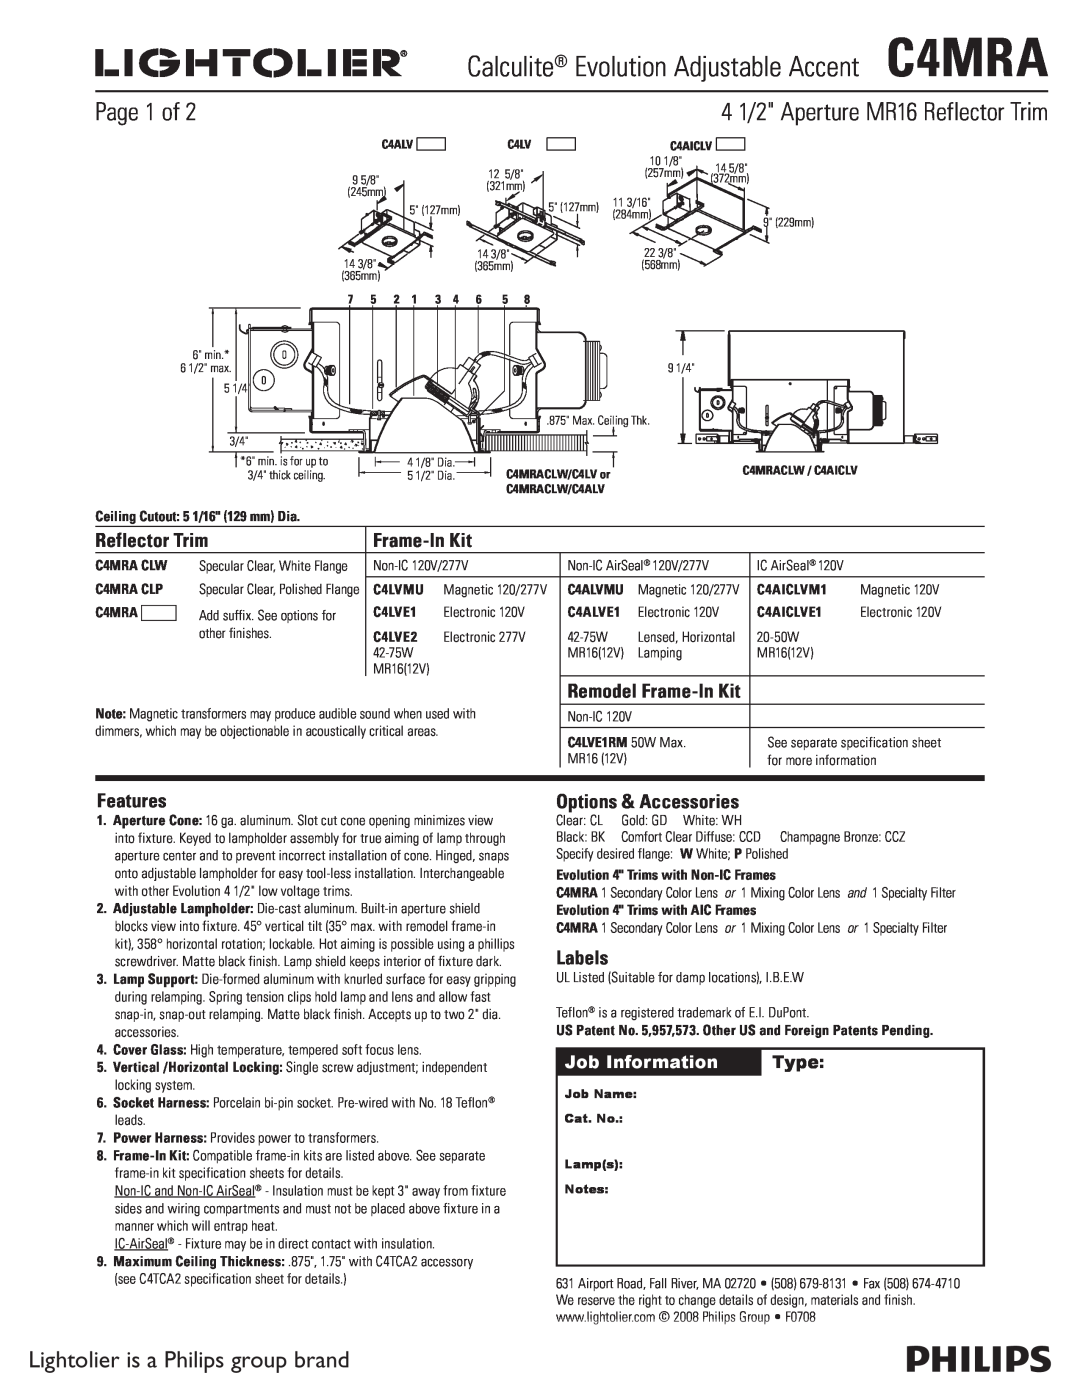 Lightolier C4MRA specifications Page 1 of, Lightolier is a Philips group brand, Reflector Trim, Frame-InKit, Features 